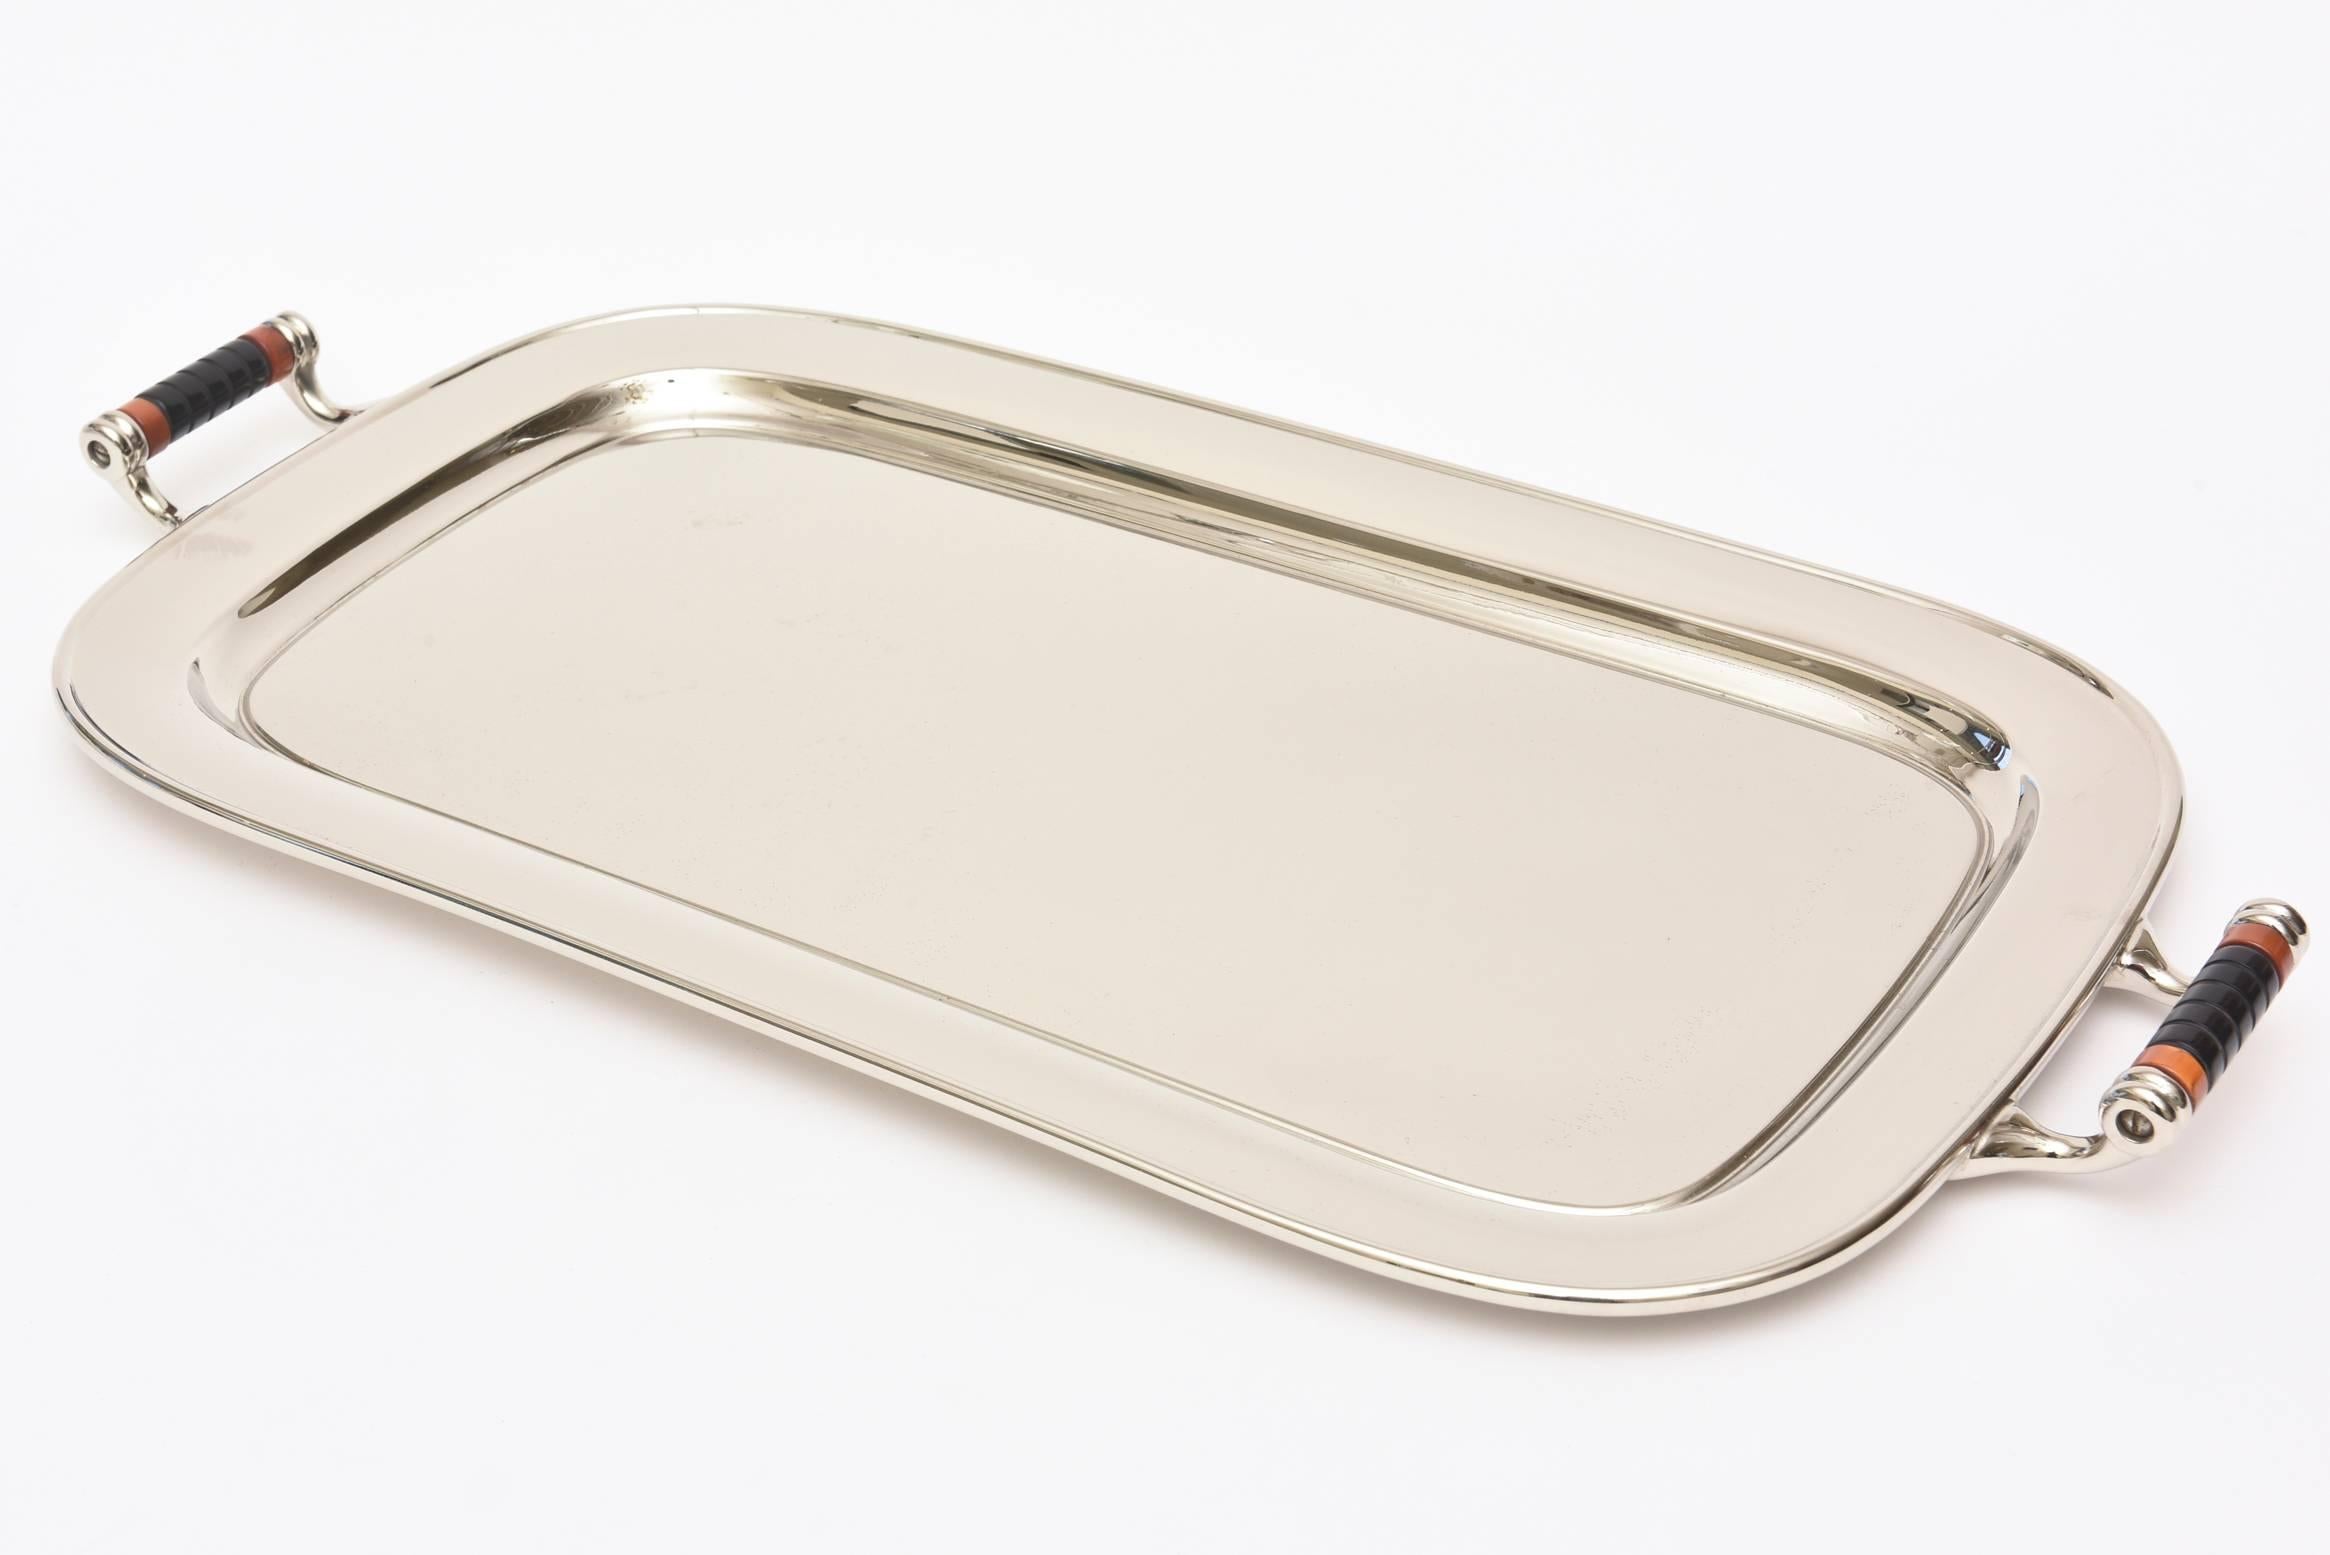 This very versatile two handled vintage Art Deco rectangular nickel silver over chrome and aluminum bar or serving tray is so handsome. It is marked on the back Manning Bowman & Co. Meriden, Conn. The original Bakelite wrapped handles are amazing.